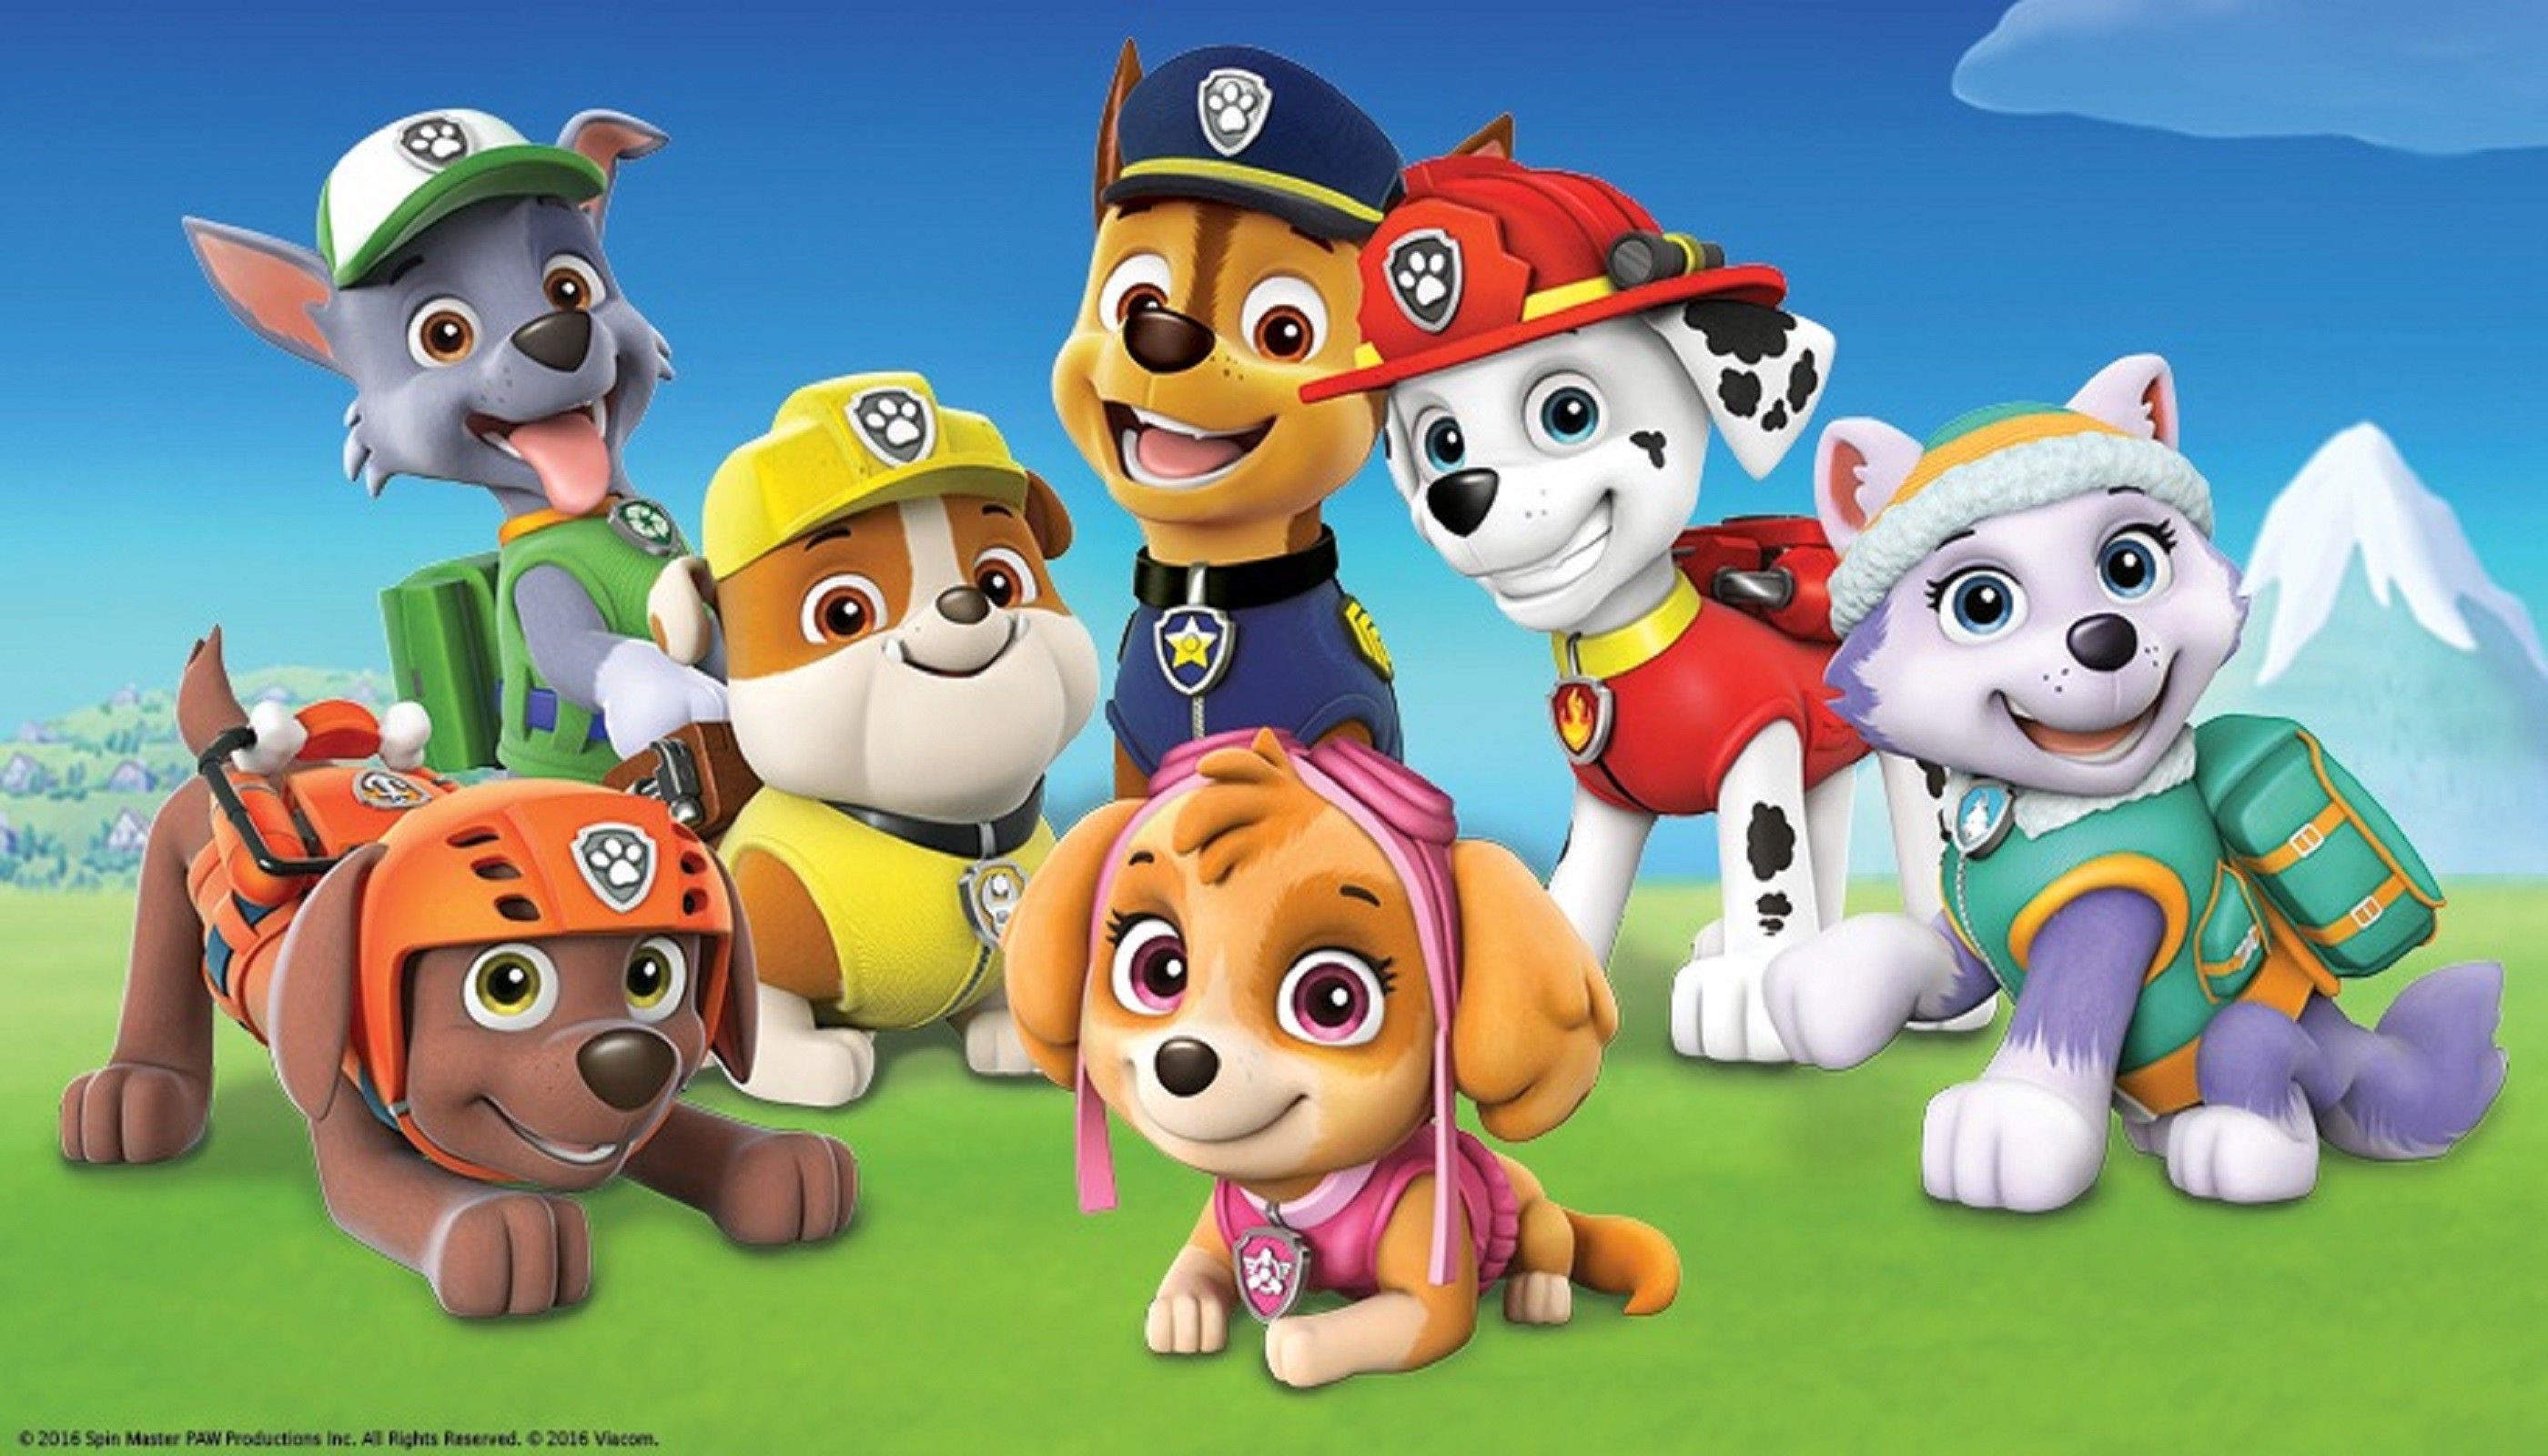 Paw Patrol Wallpaper background picture